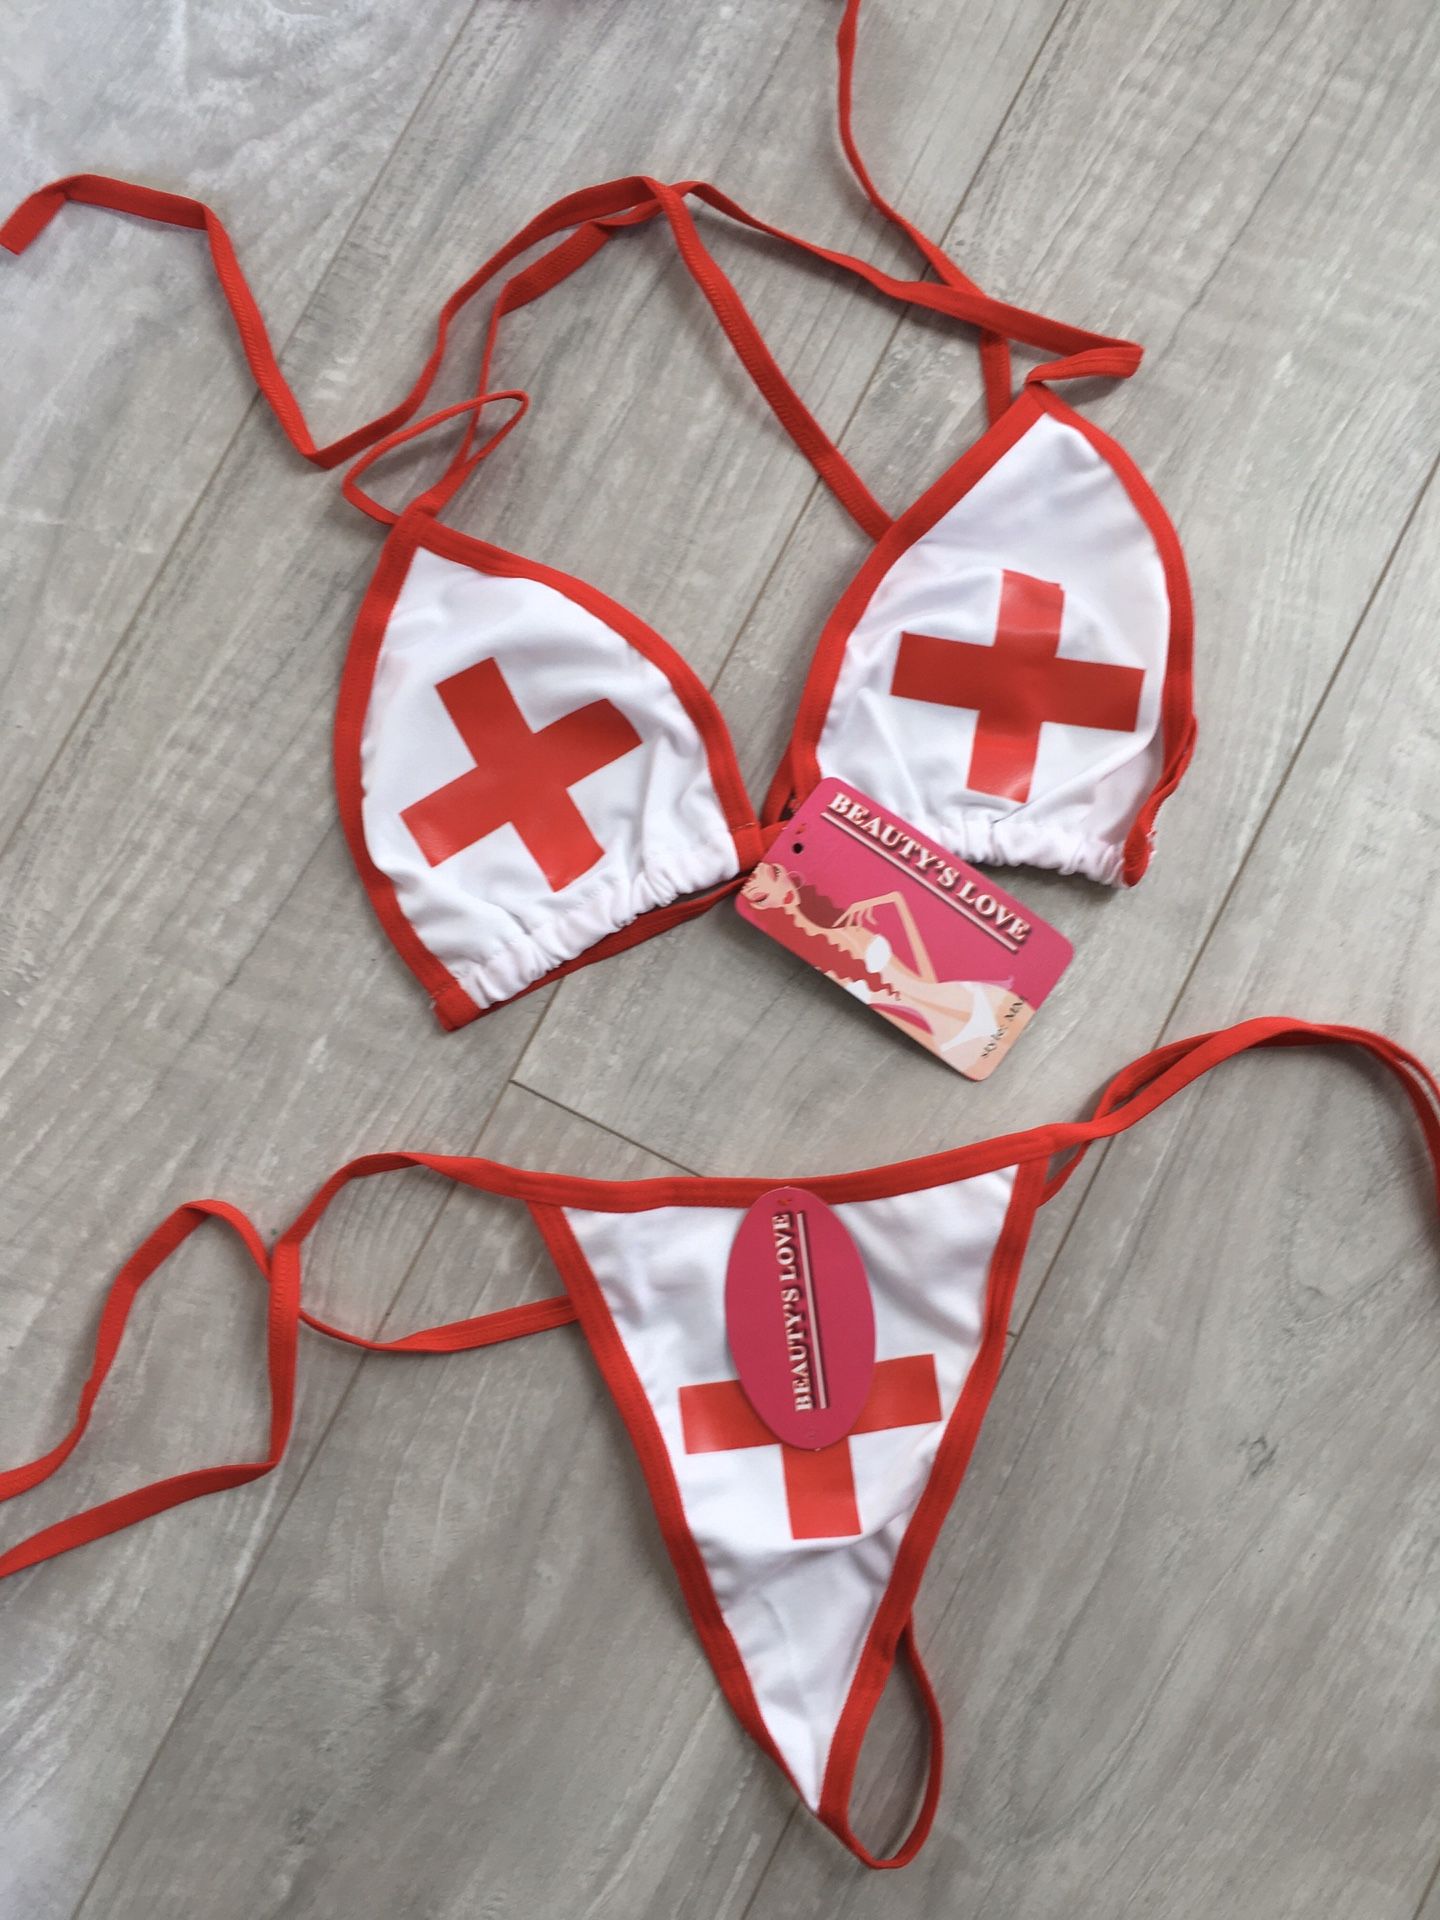 Sexy lingerie nurse halter top and G string Perfect for Valentine’s Day